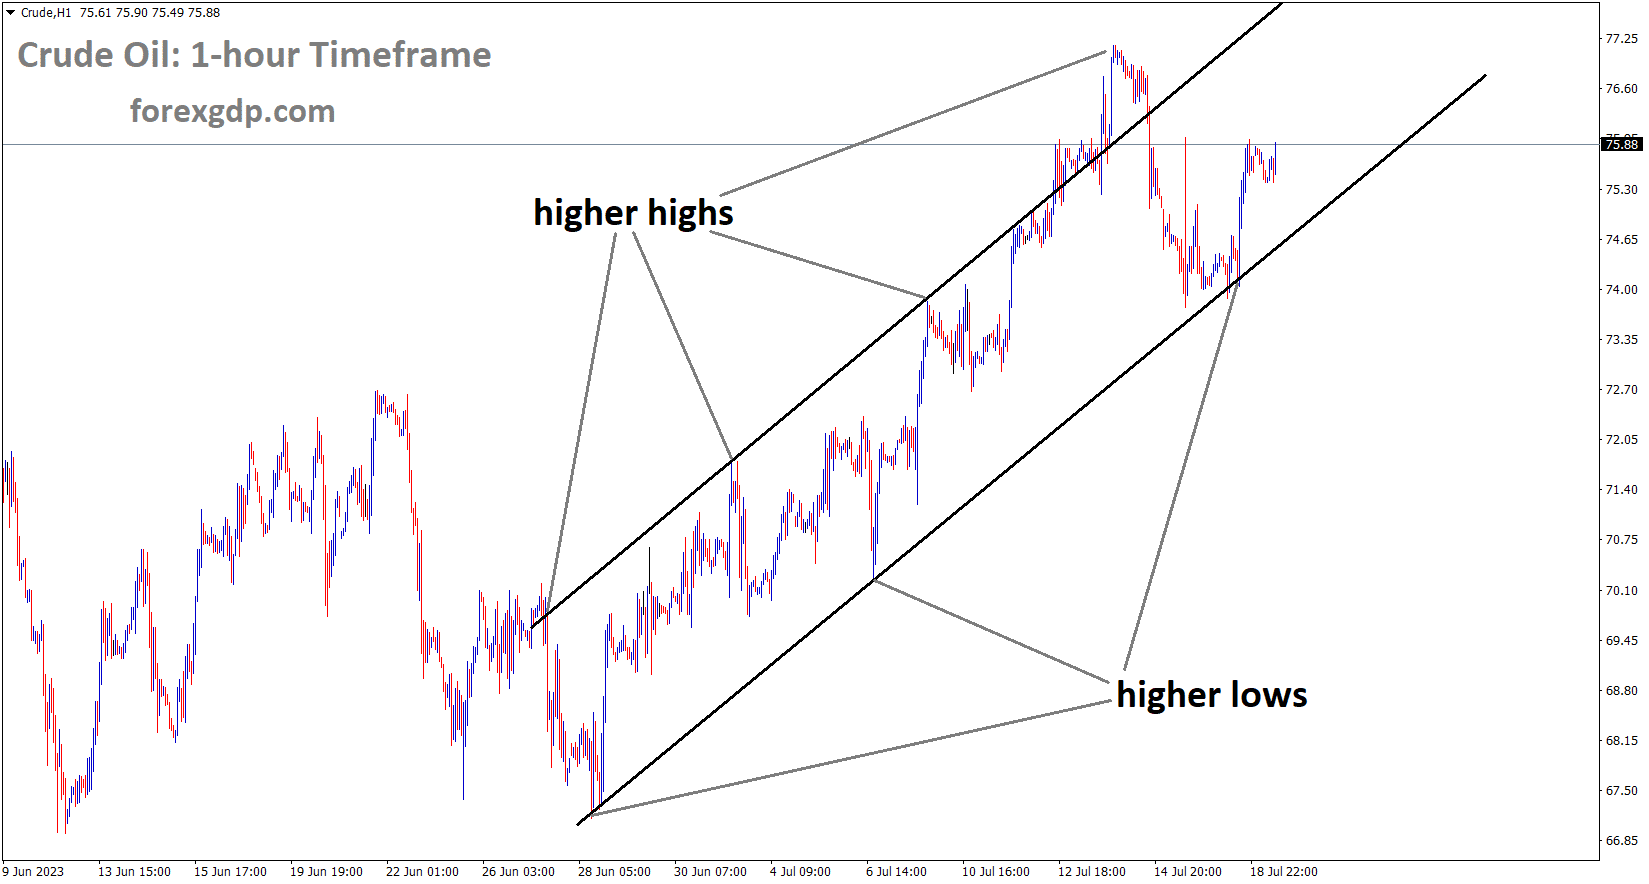 Crude oil Price is moving in an Ascending channel and the market has rebounded from the higher low area of the channel